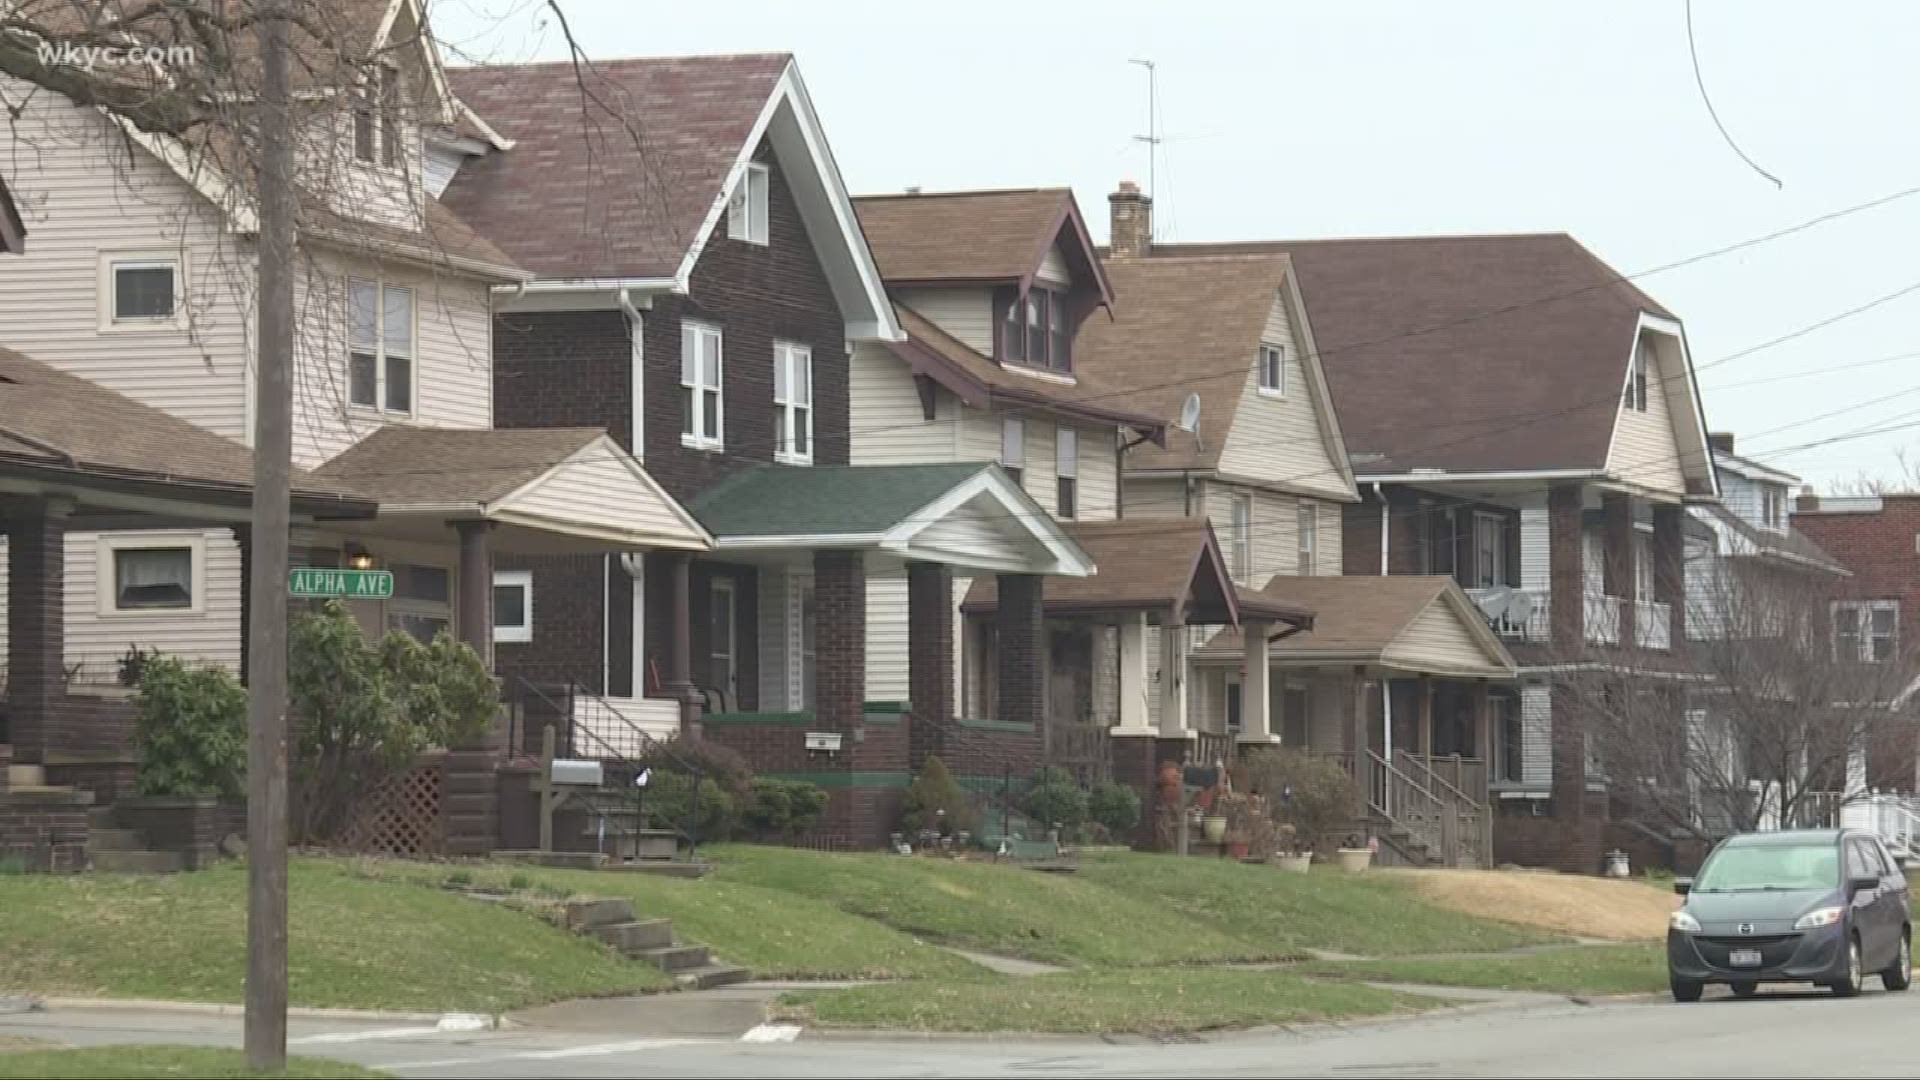 For the first time in 50 years, there'll be a new home on the block. Brandon Simmons reports.